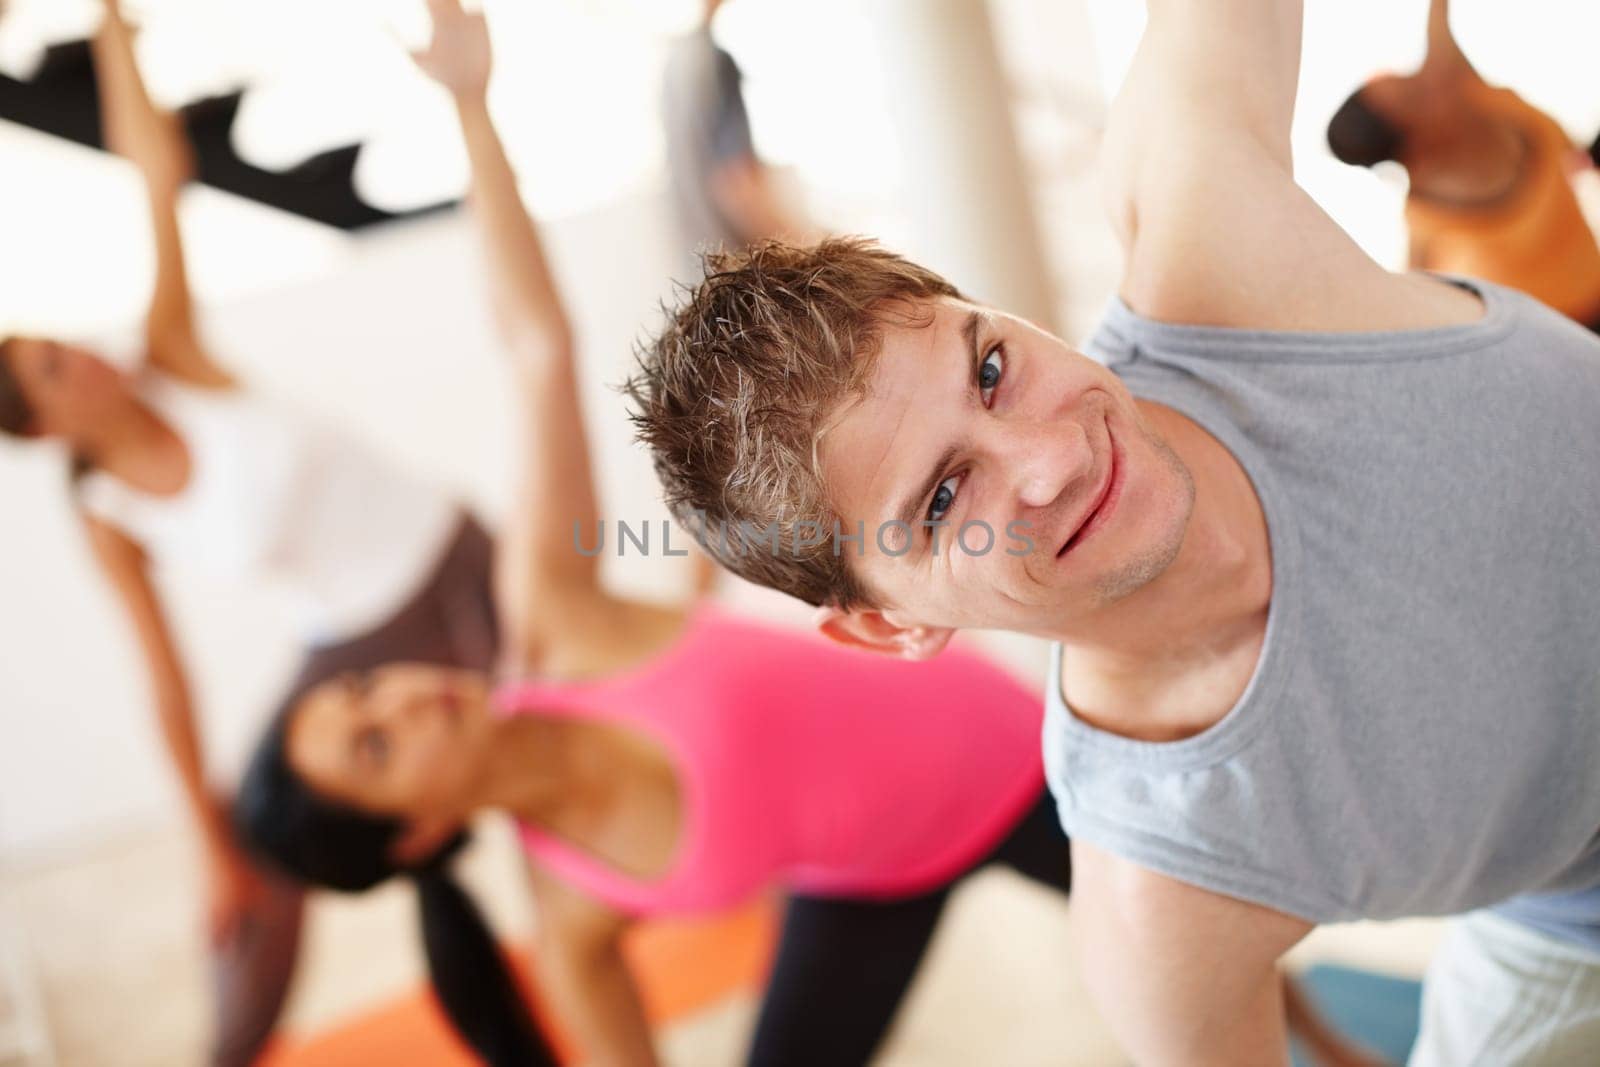 Yoga is not exclusively for women. A young man smiling at the camera in yoga class